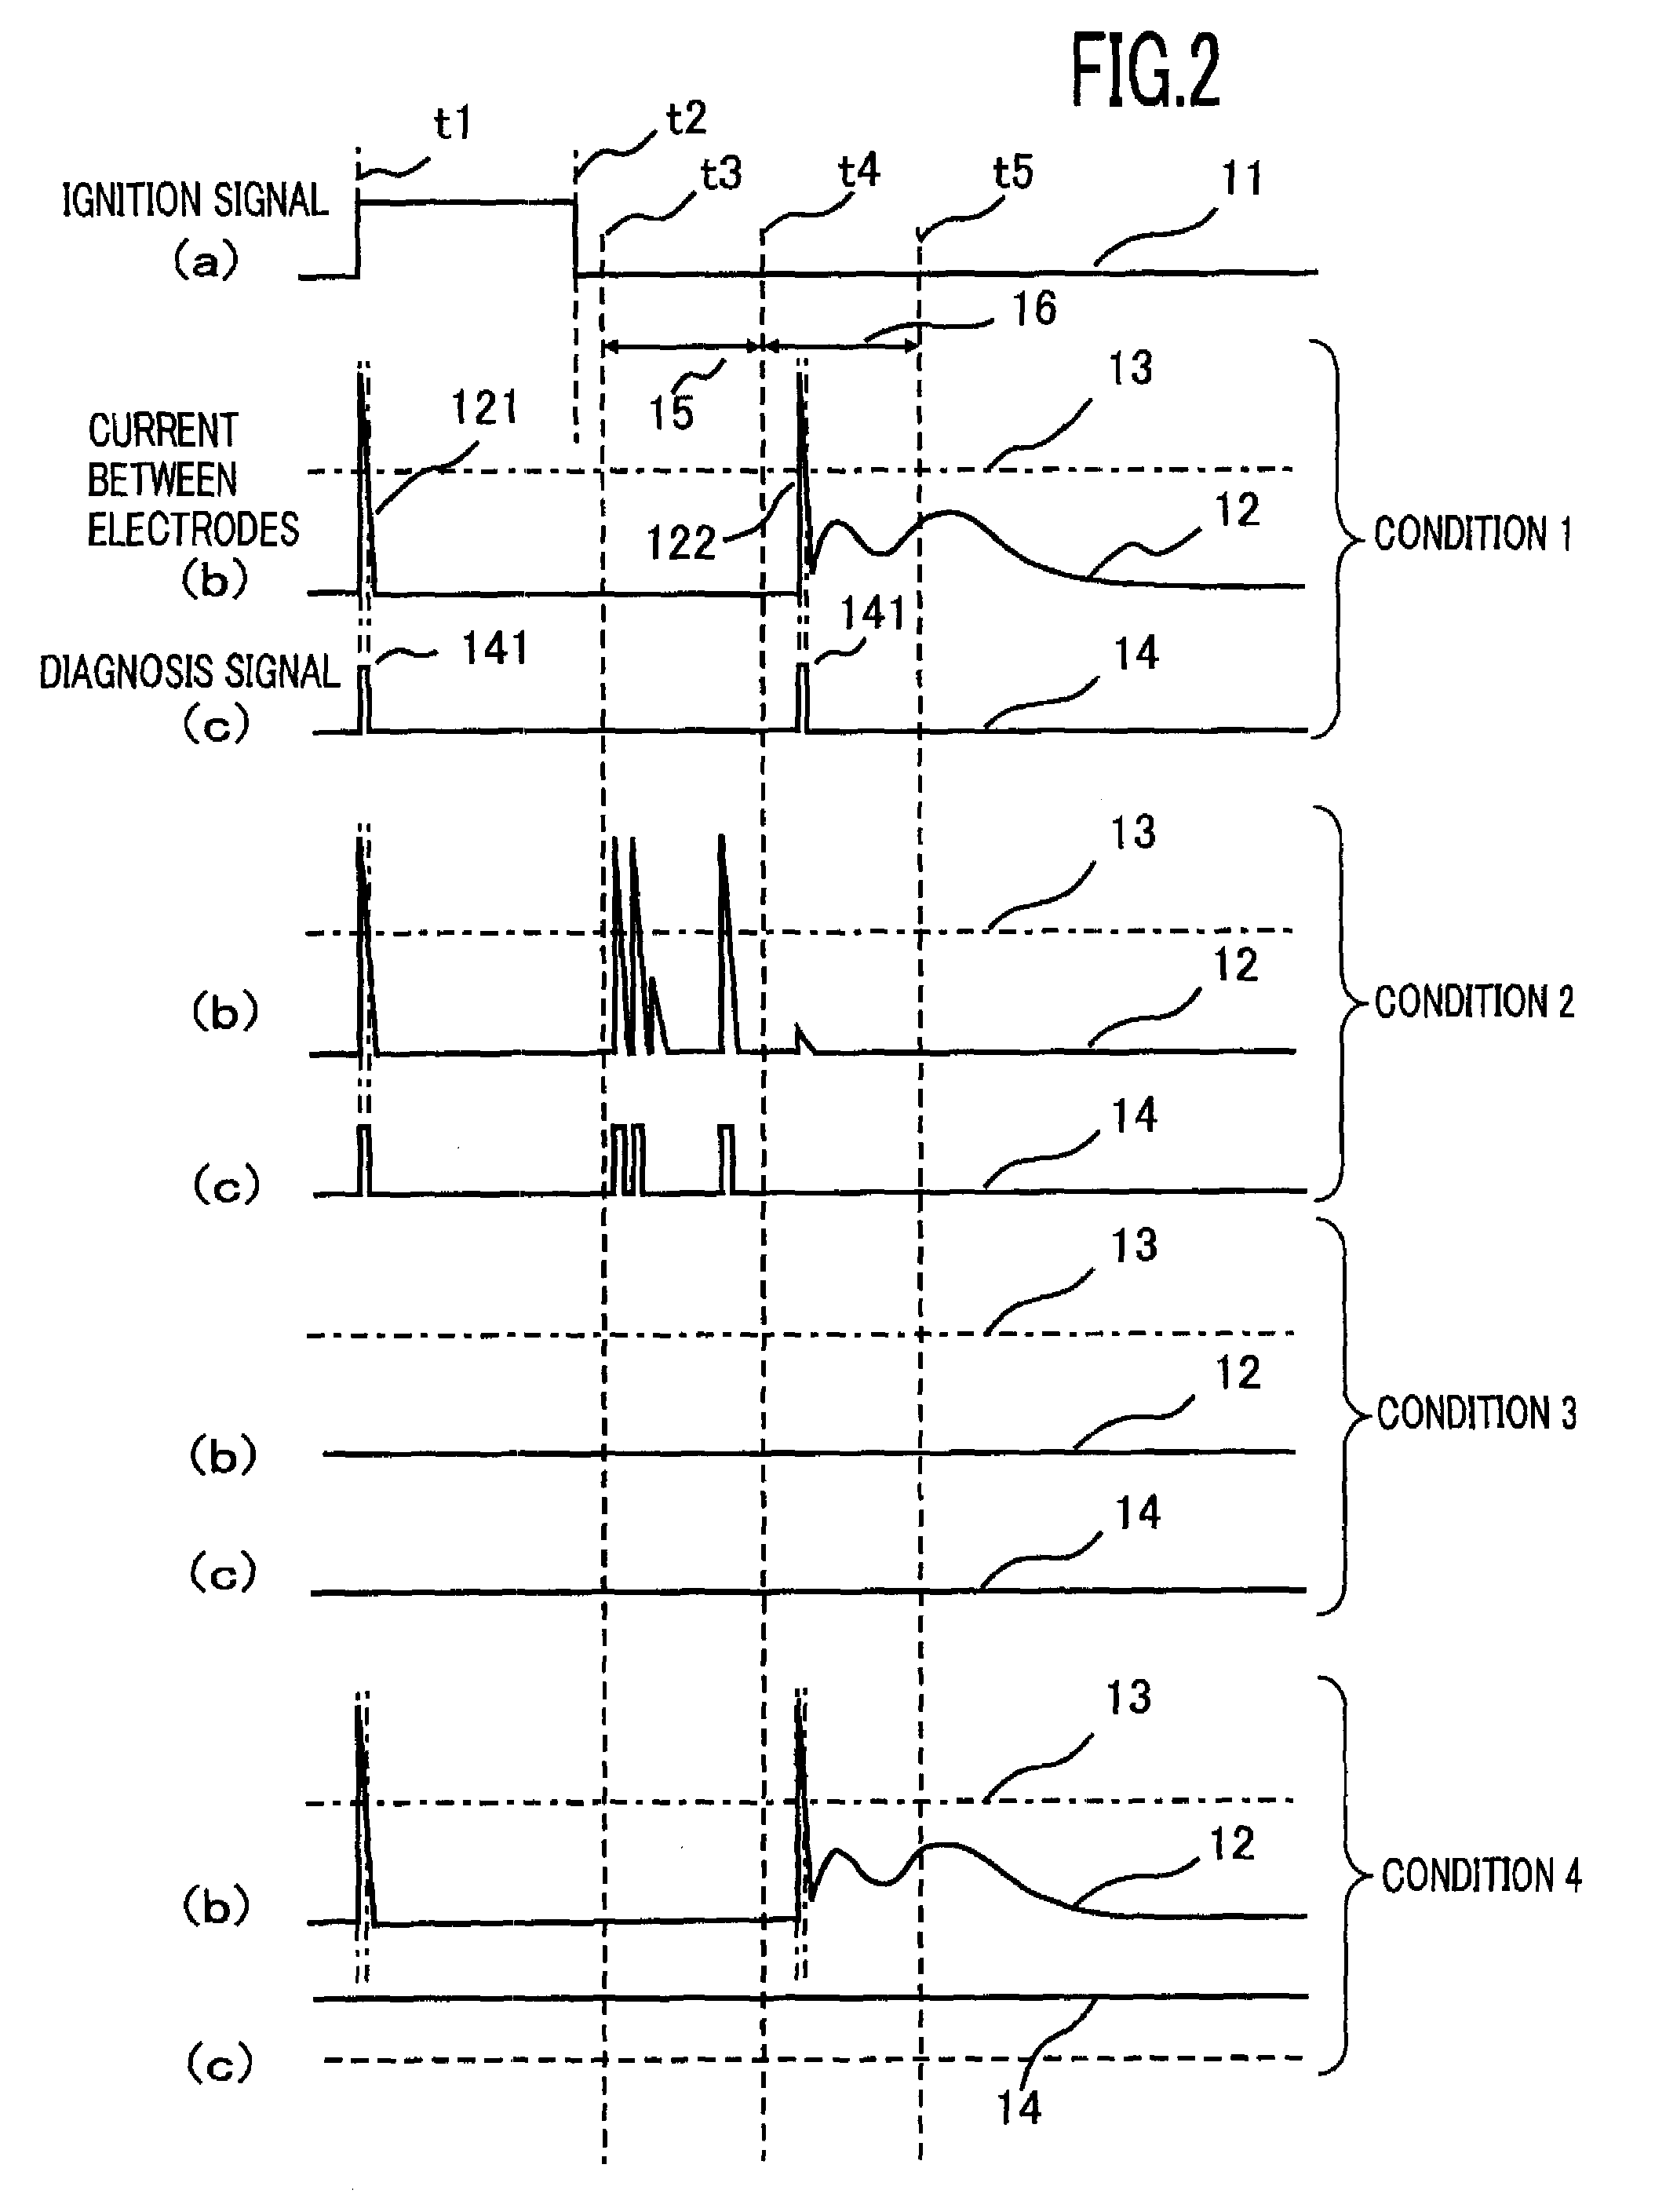 Internal-combustion-engine ignition diagnosis apparatus and internal-combustion-engine control apparatus